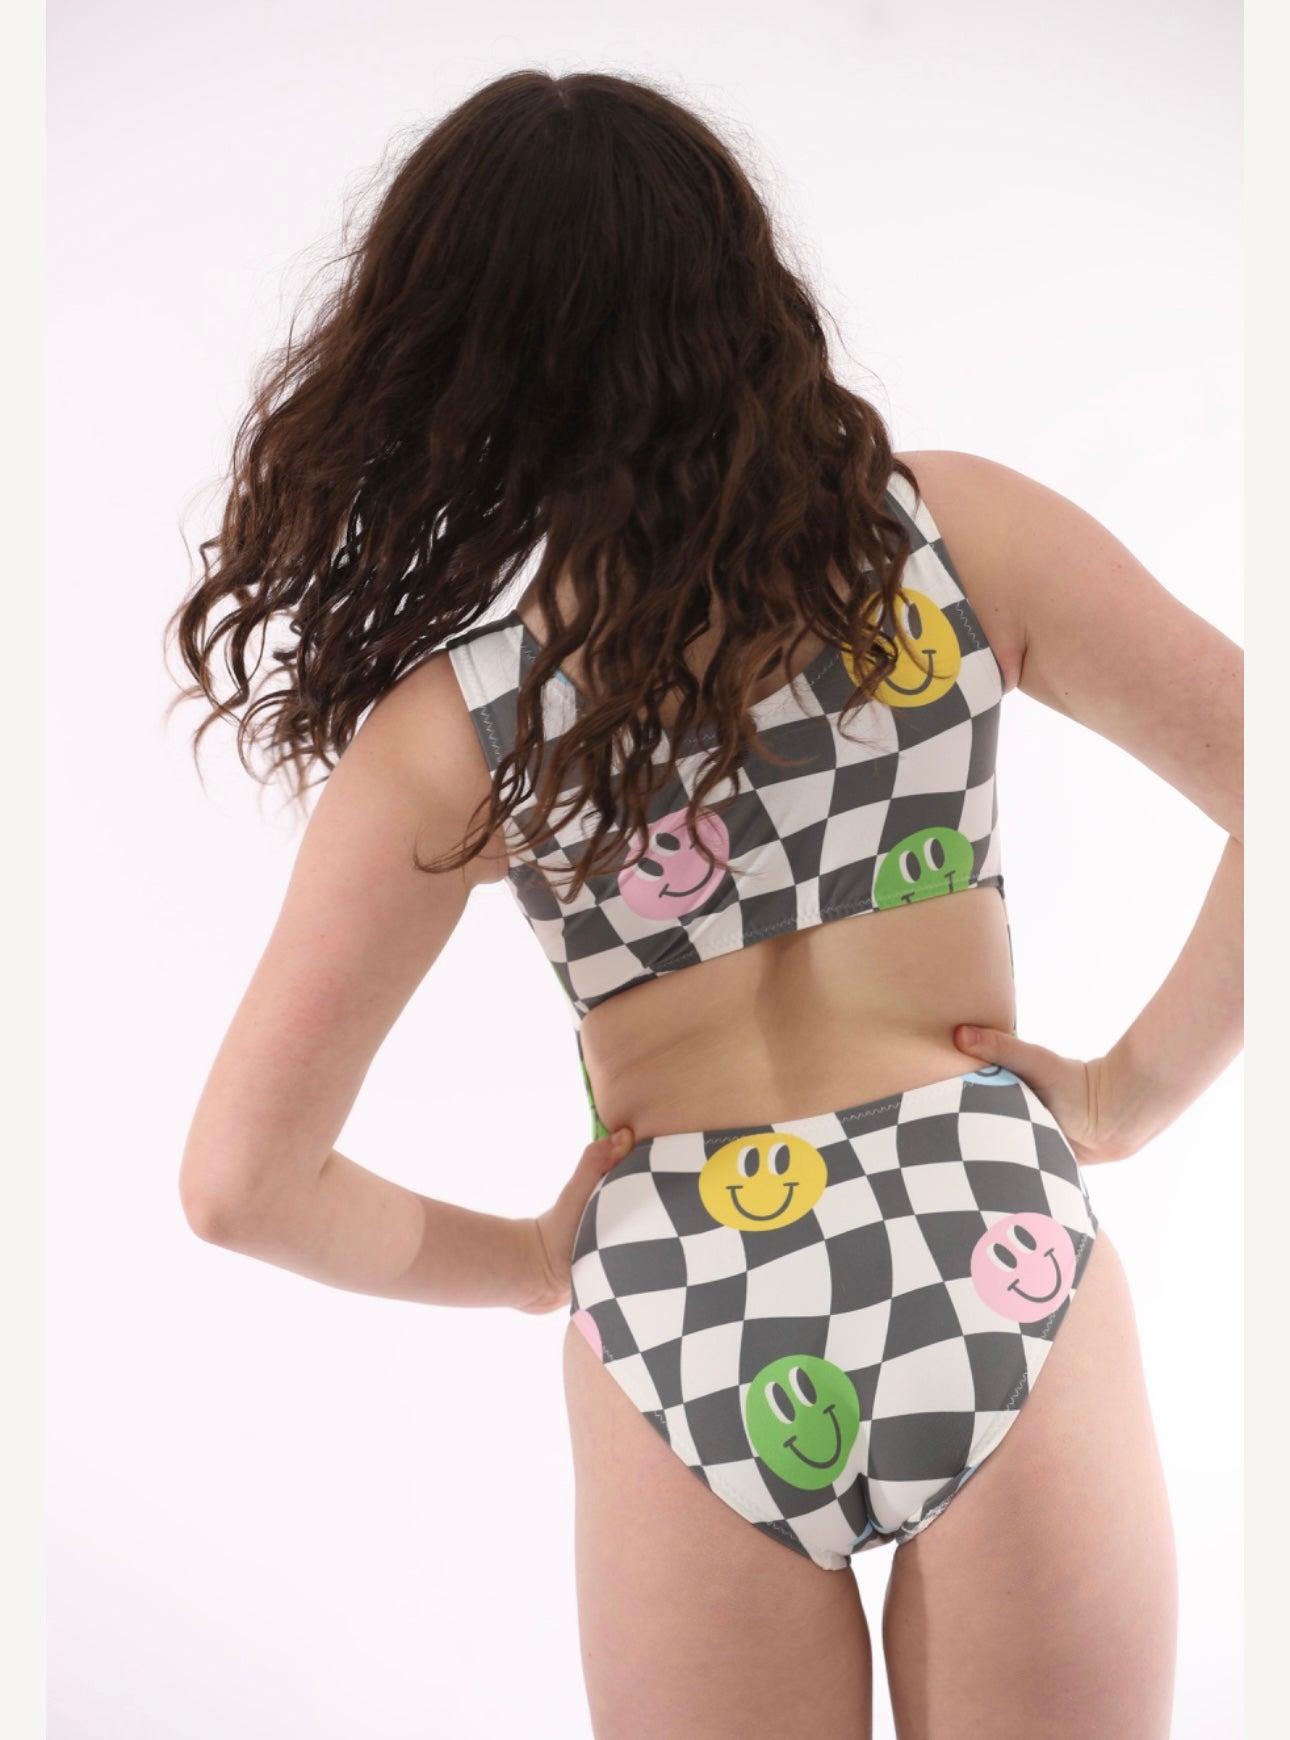 Open-back leotard with black and white checkers and smiley faces